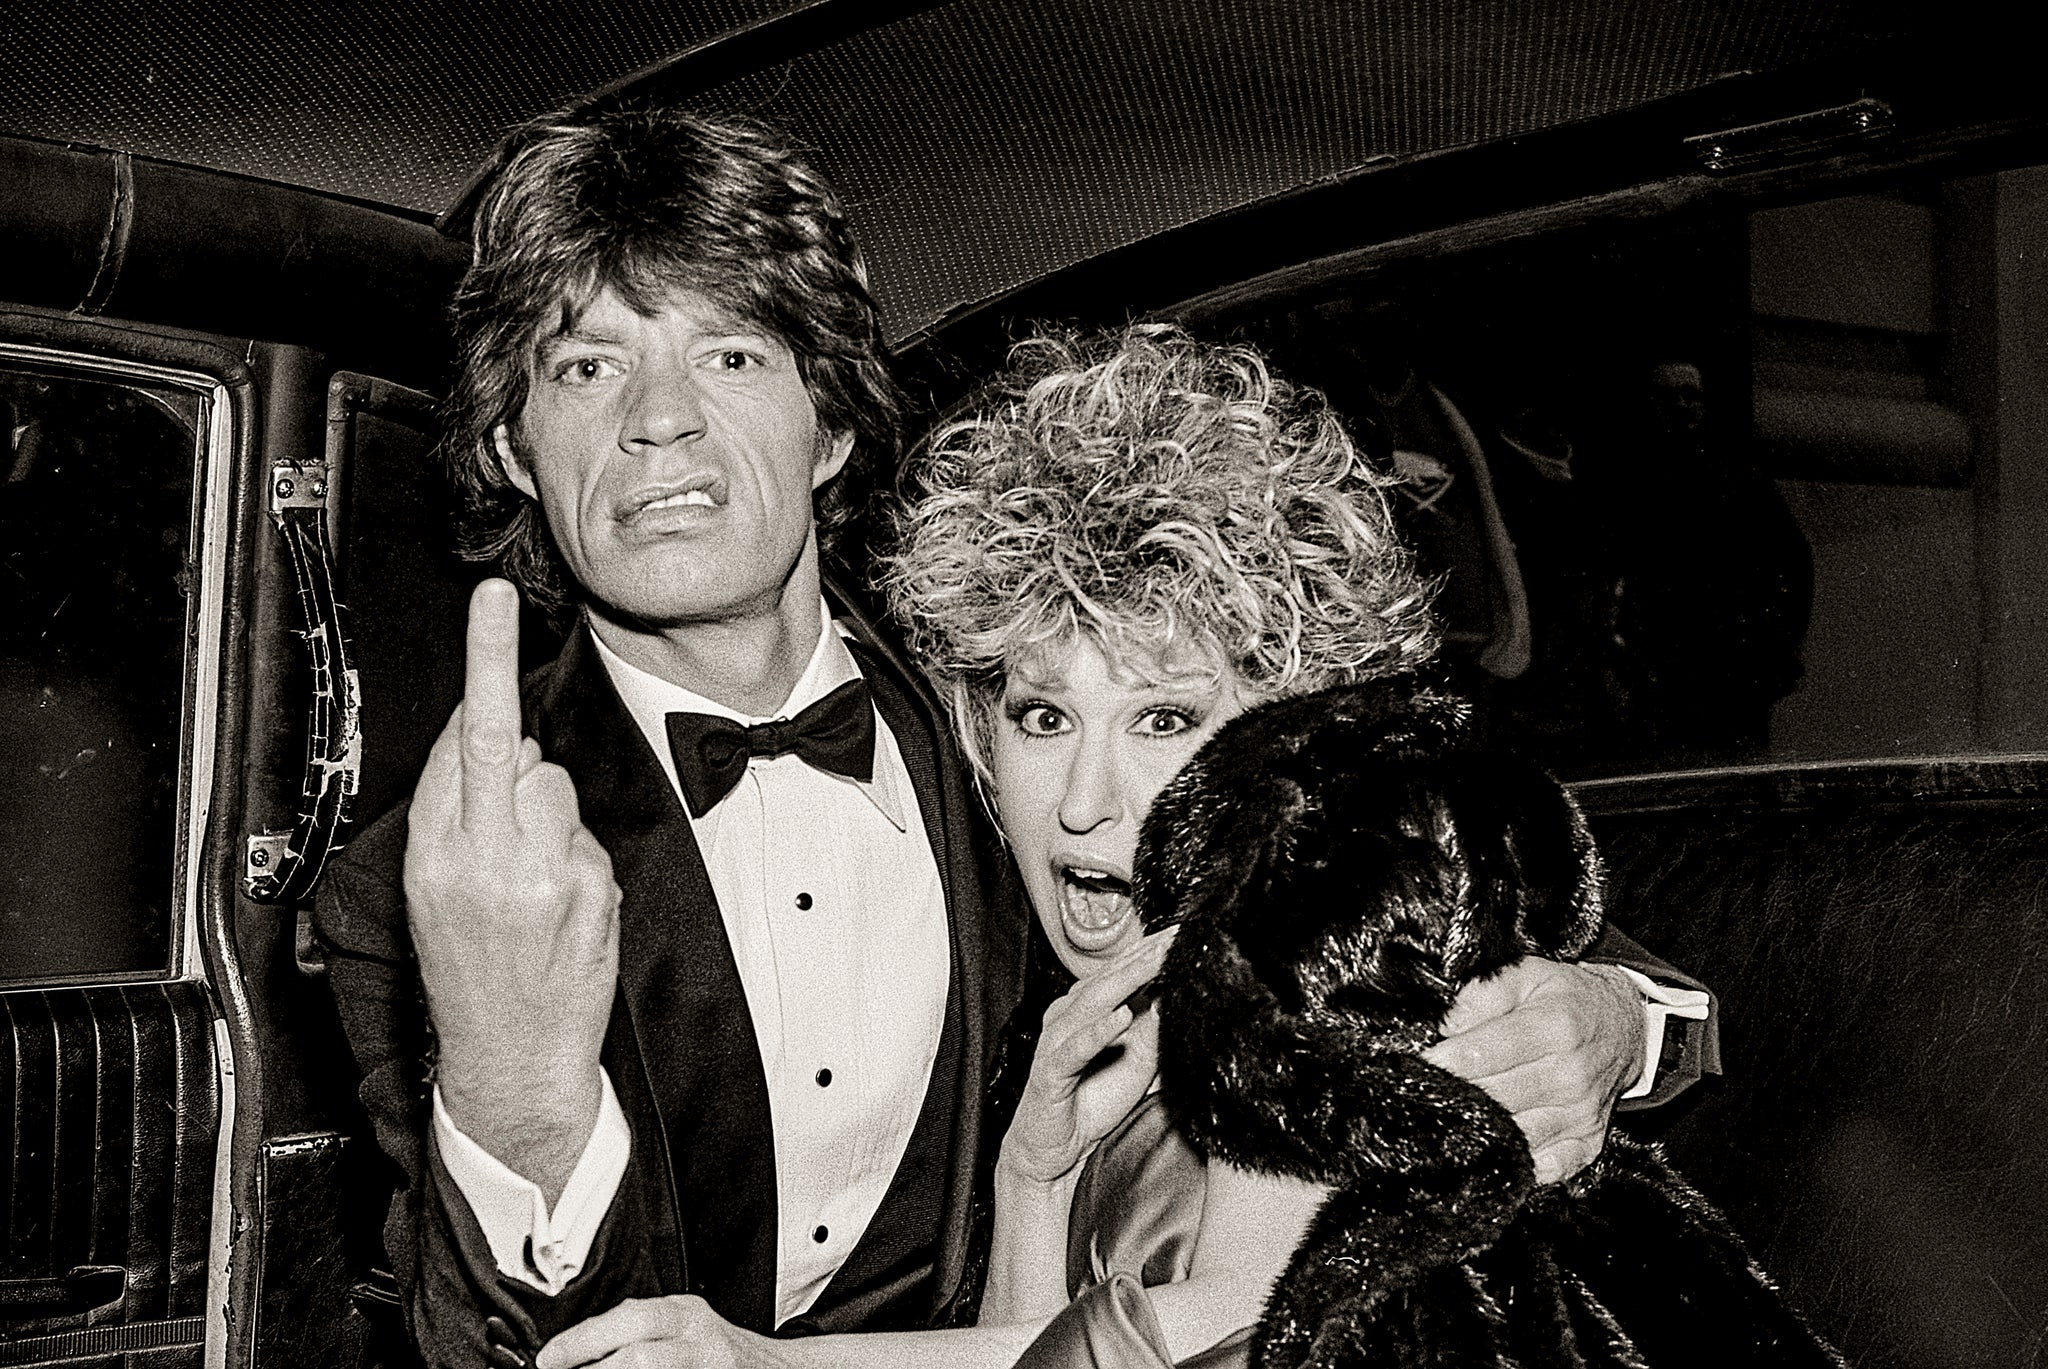 Mick Jagger and Bette Midler